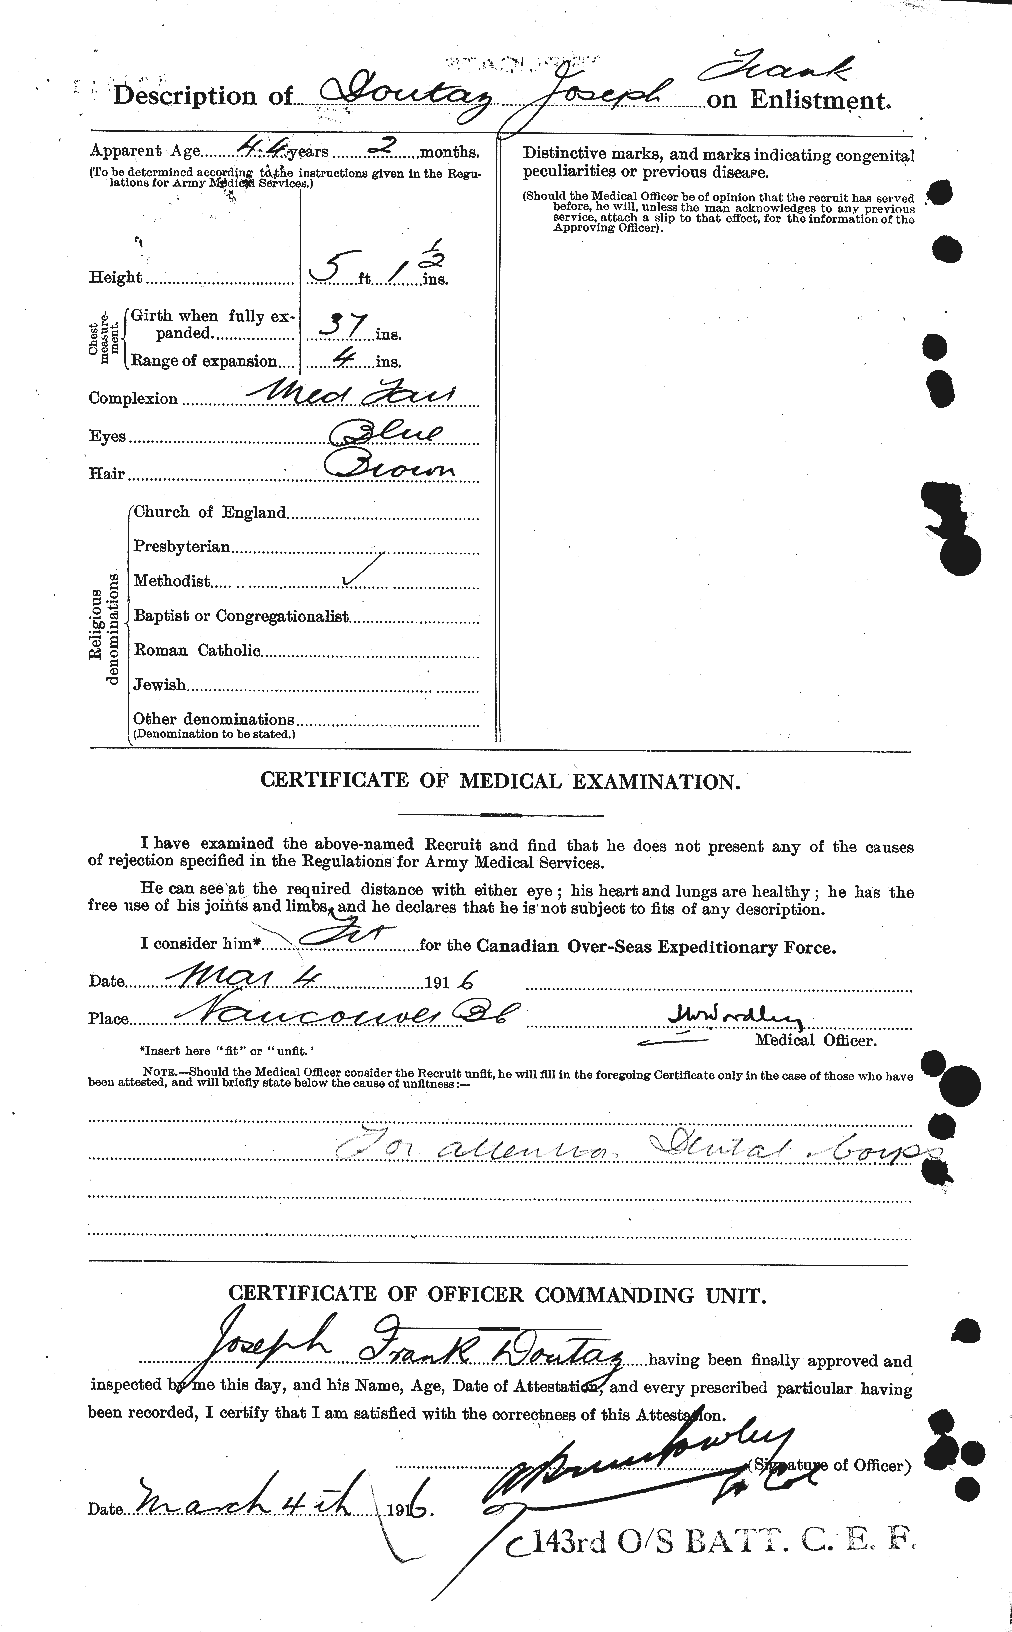 Personnel Records of the First World War - CEF 296912b